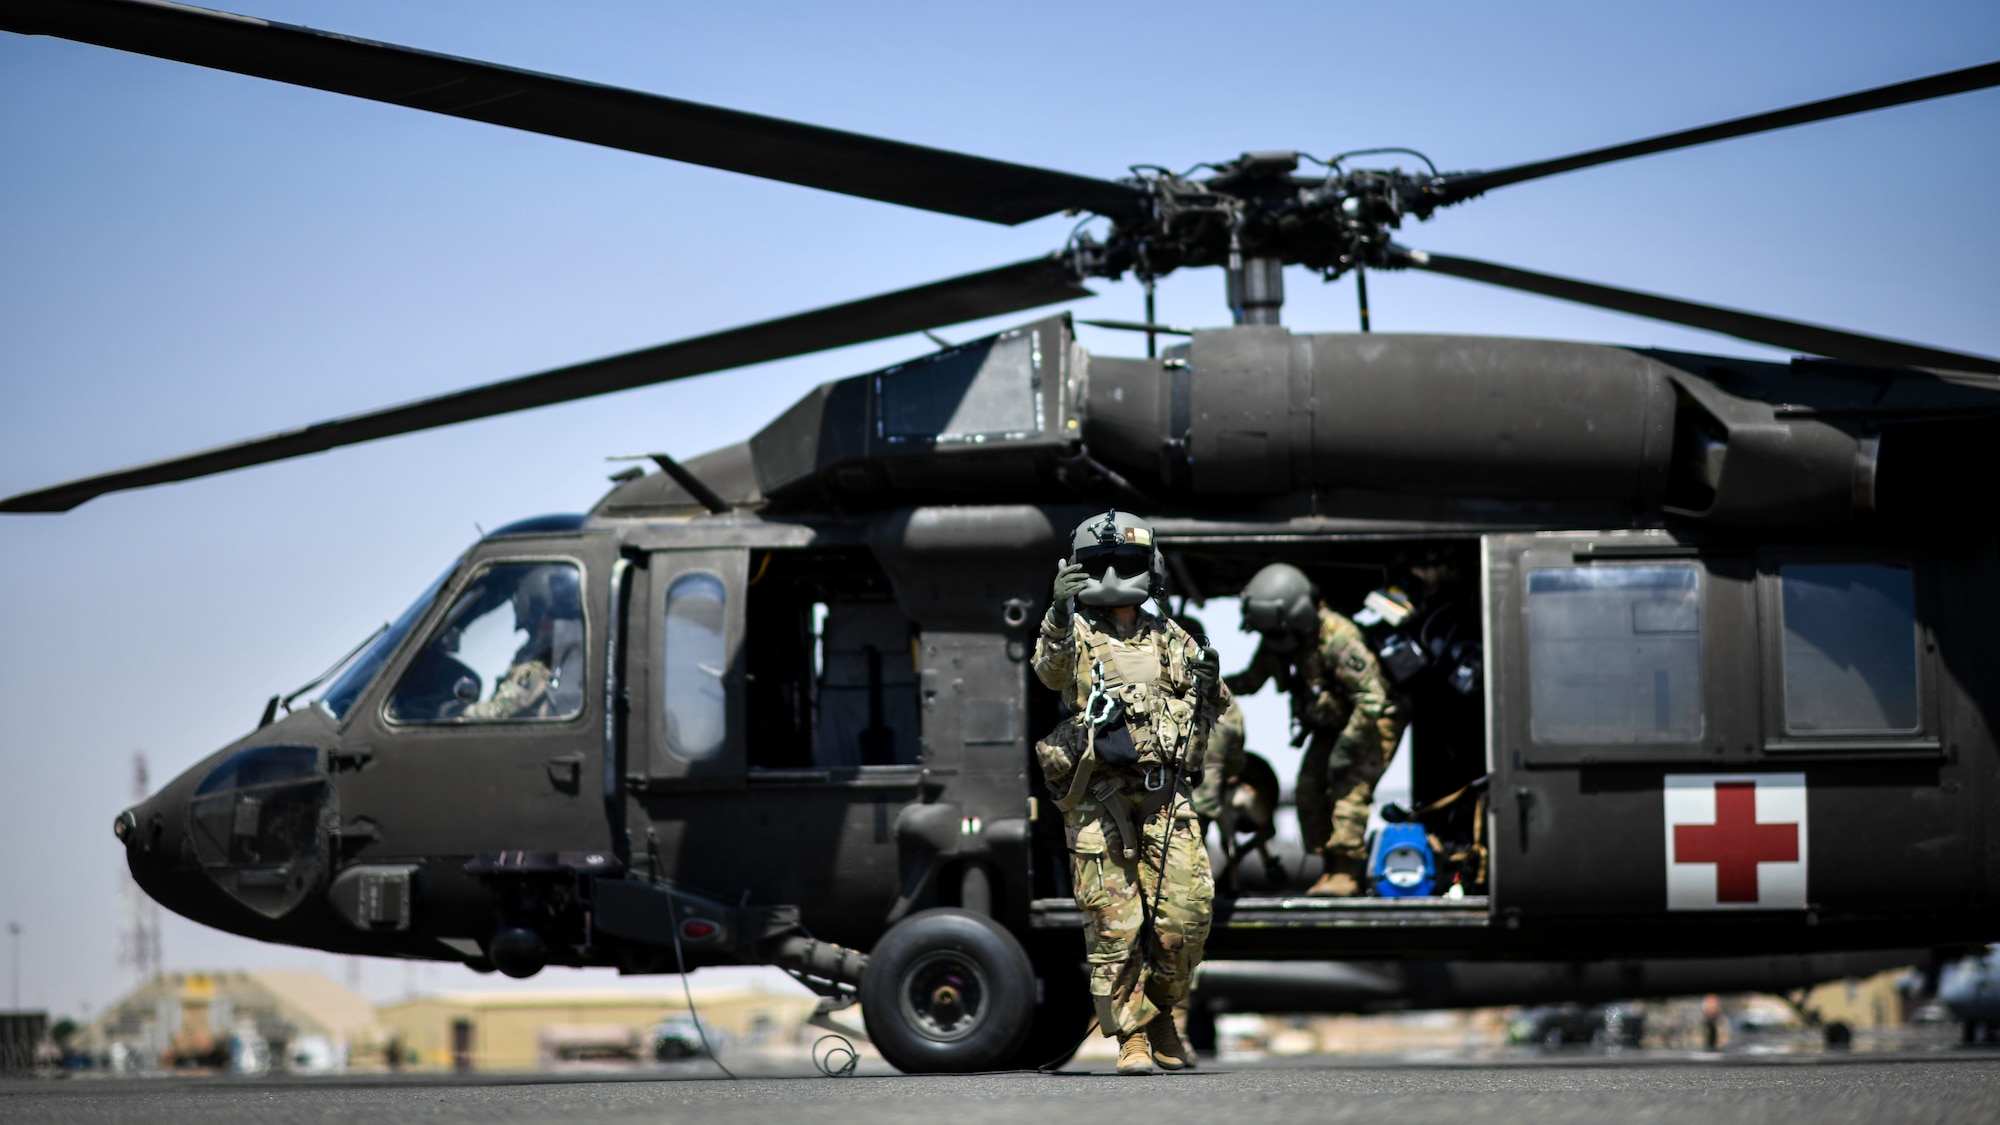 A UH-60 Black Hawk crewmember signals a military working dog team to board the aircraft at Ali Al Salem Air Base, Kuwait, Sept. 13, 2019. As part of the exercise, U.S. Army veterinary doctors worked together with emergency medical responders sharing life-saving measures for MWDs in case of extreme emergencies where veterinary technicians might not be immediately available. (U.S. Air Force photo by Staff Sgt. Mozer O. Da Cunha)